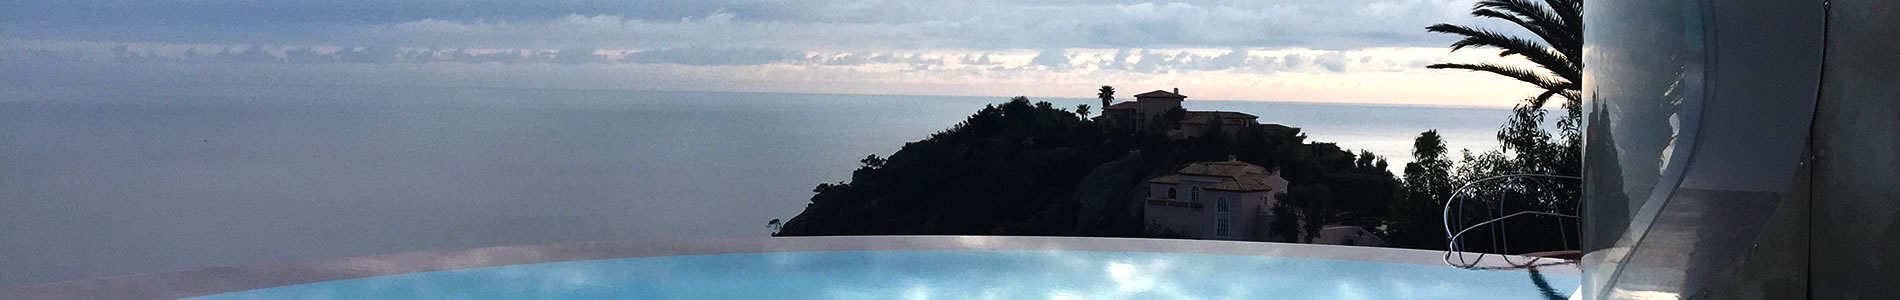 Extract from The Palais Bulles in balance between the sea and the sky